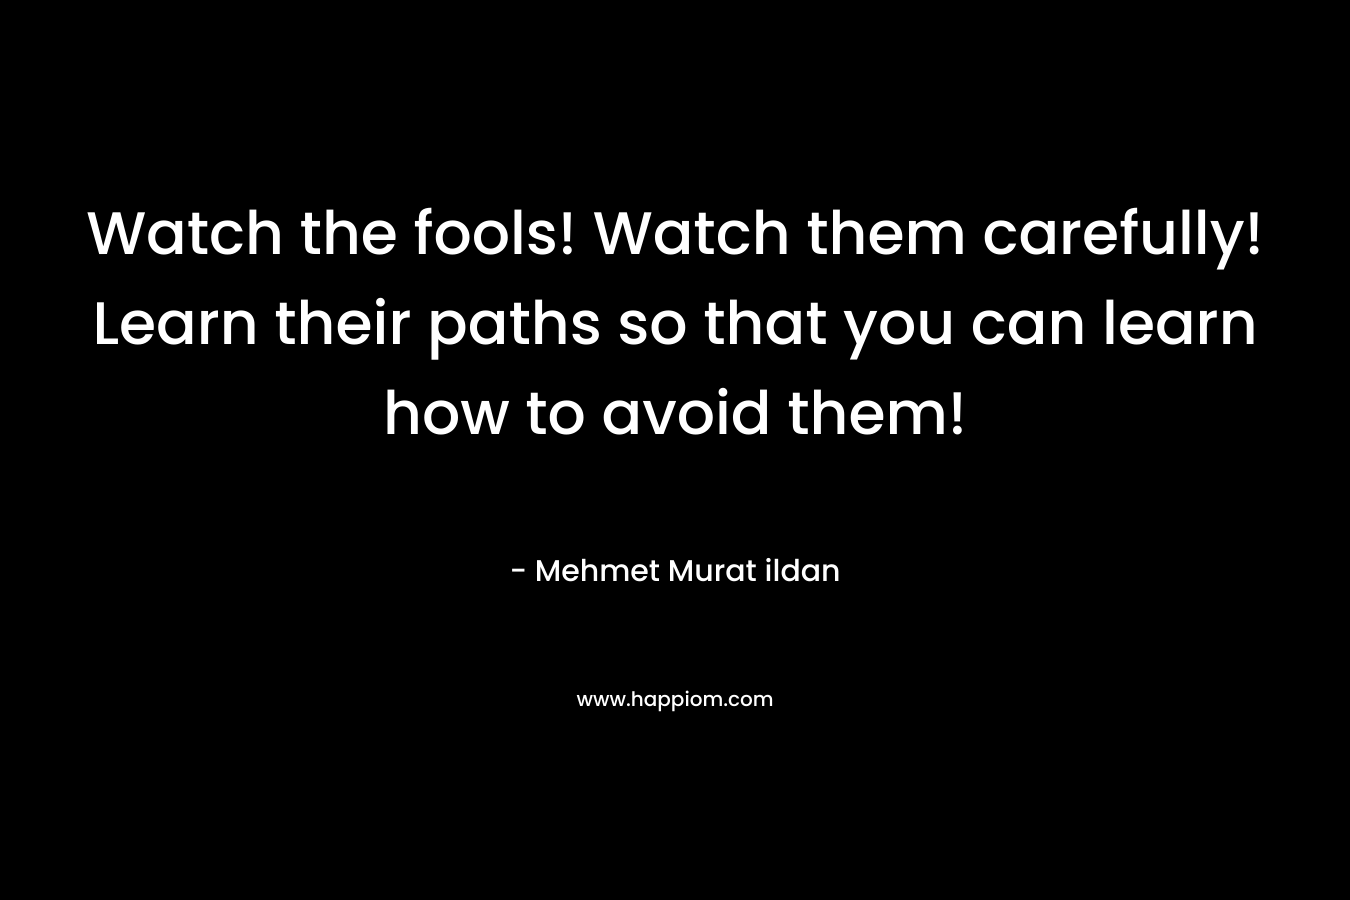 Watch the fools! Watch them carefully! Learn their paths so that you can learn how to avoid them!